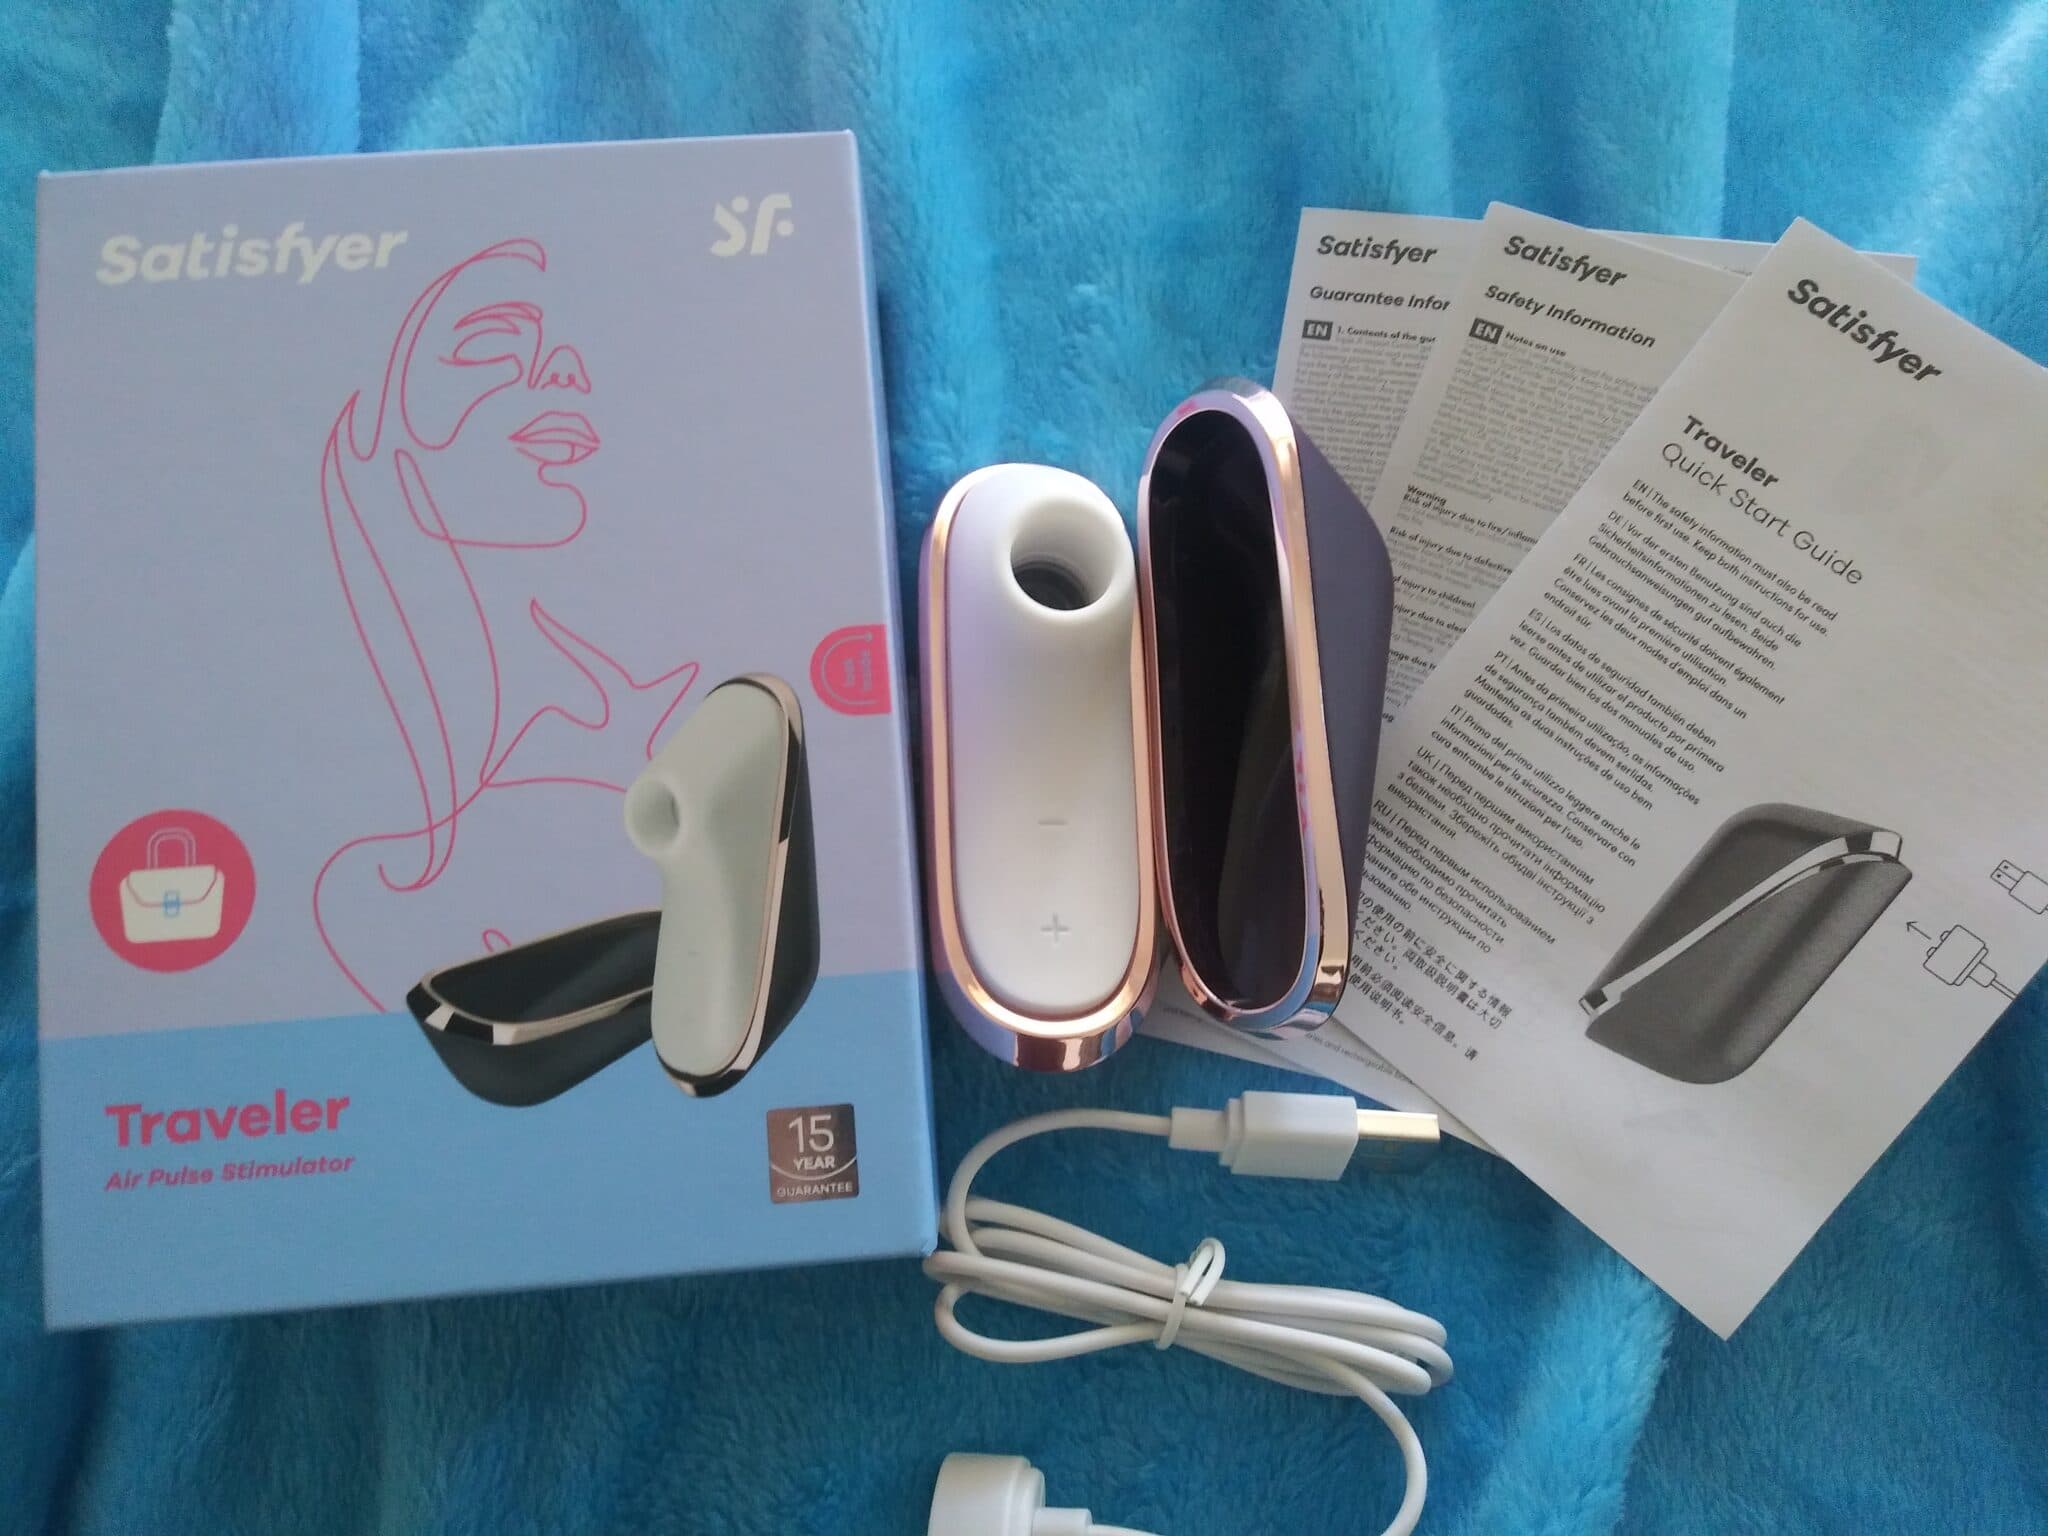 Specifications and features Satisfyer Pro Traveler